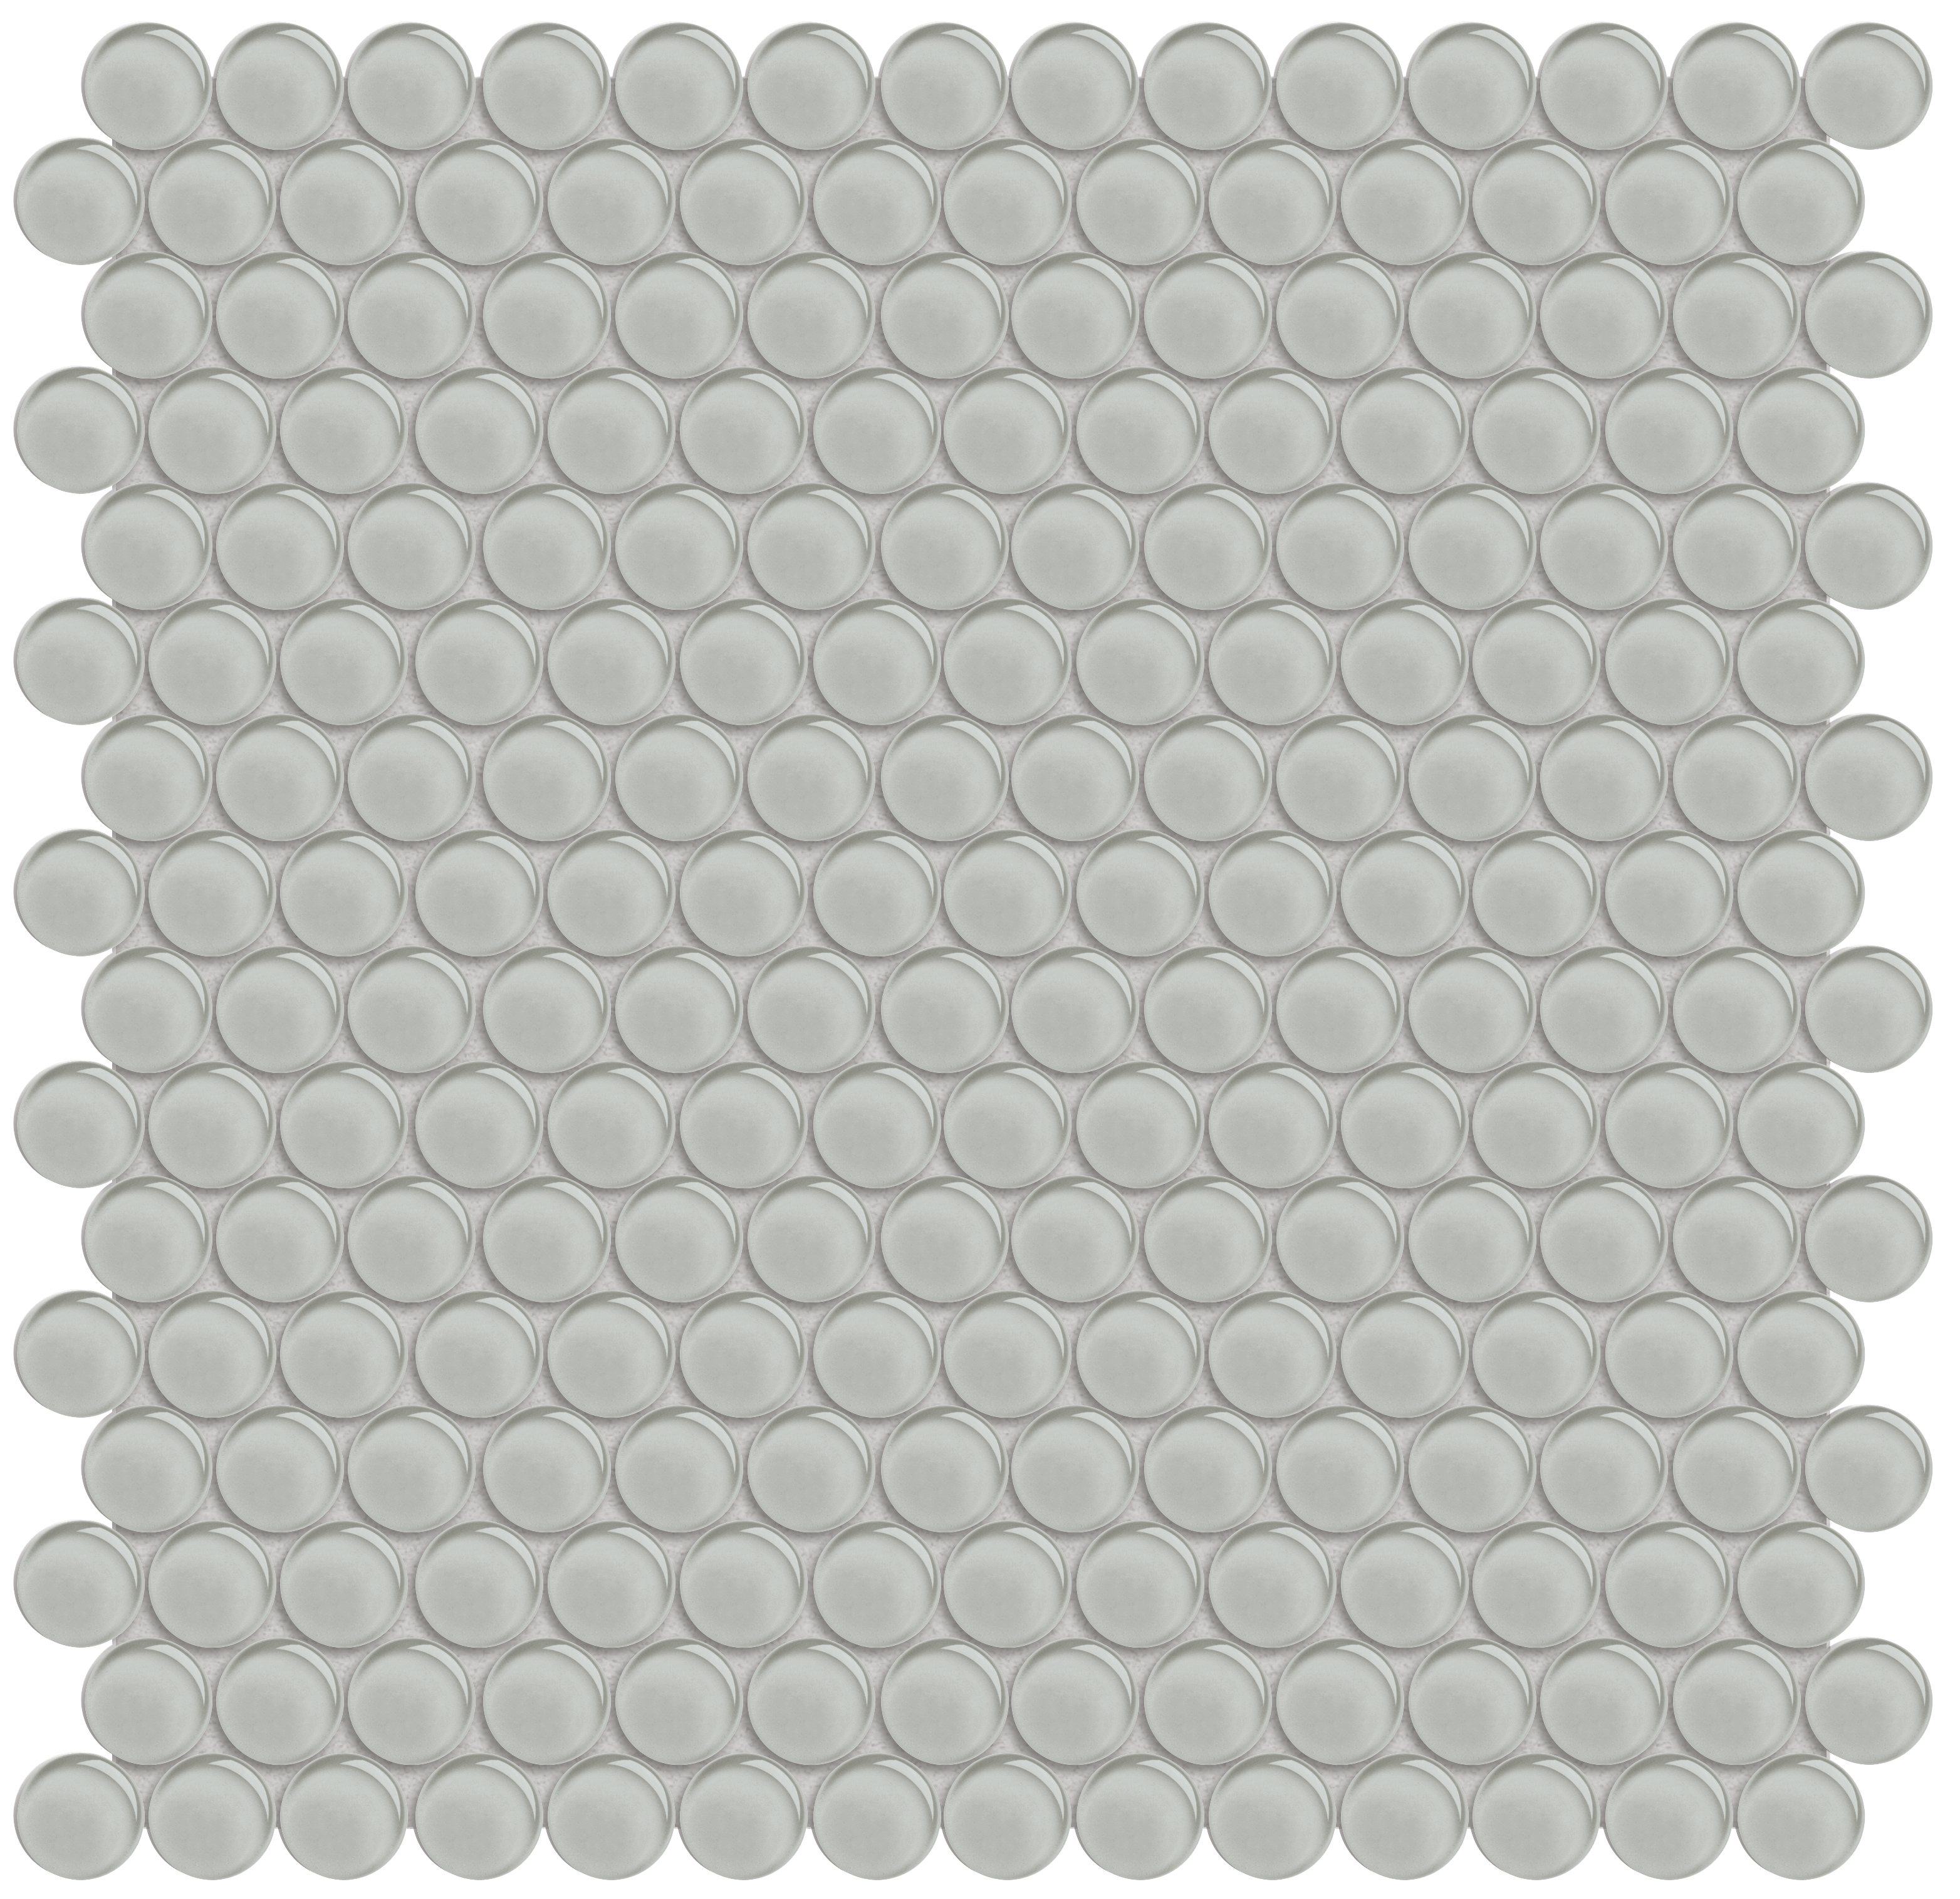 mist penny round pattern fused glass mosaic from element anatolia collection distributed by surface group international glossy finish rounded edge mesh shape